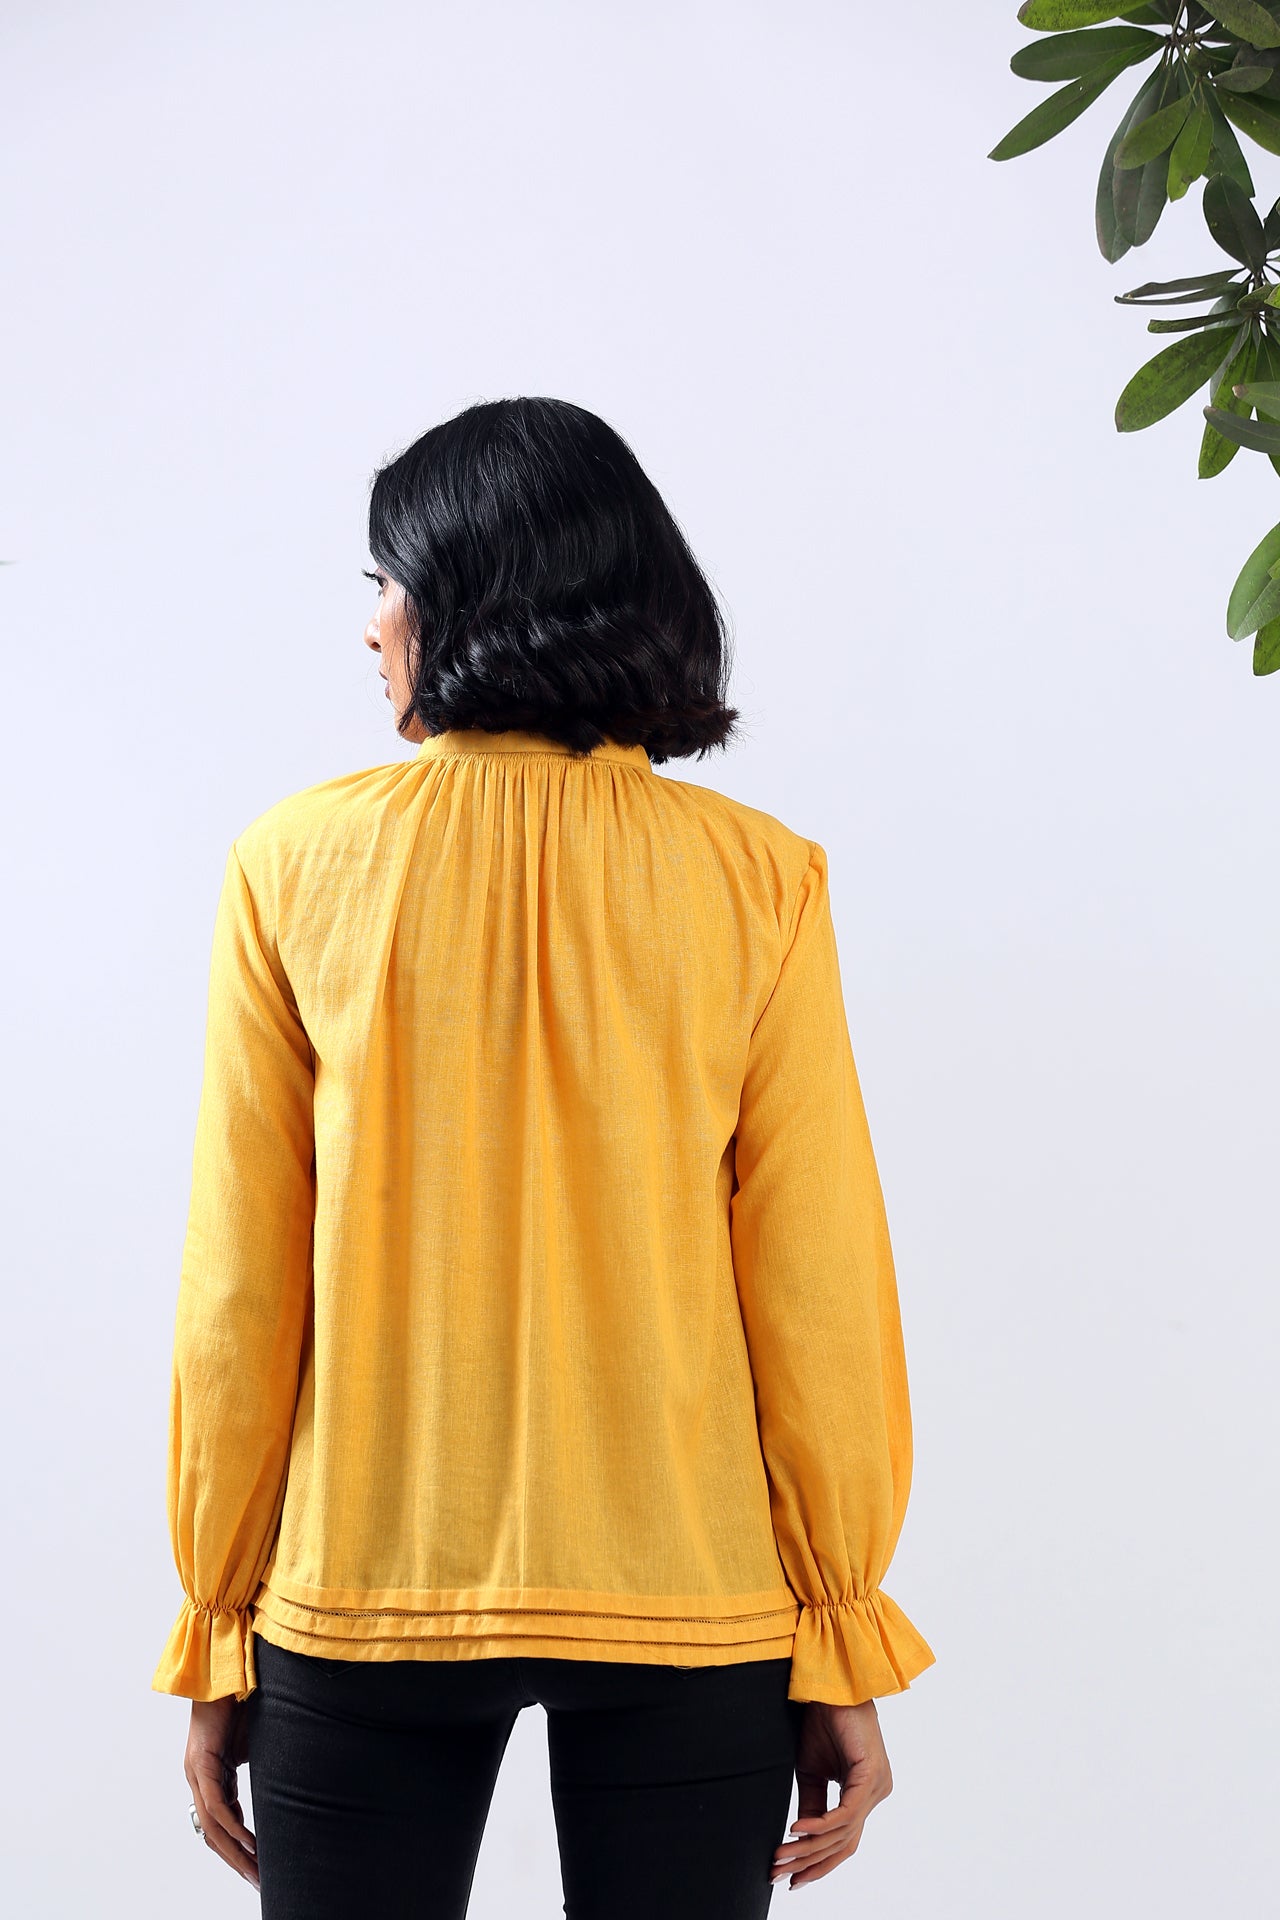 Edna - Gathered Top